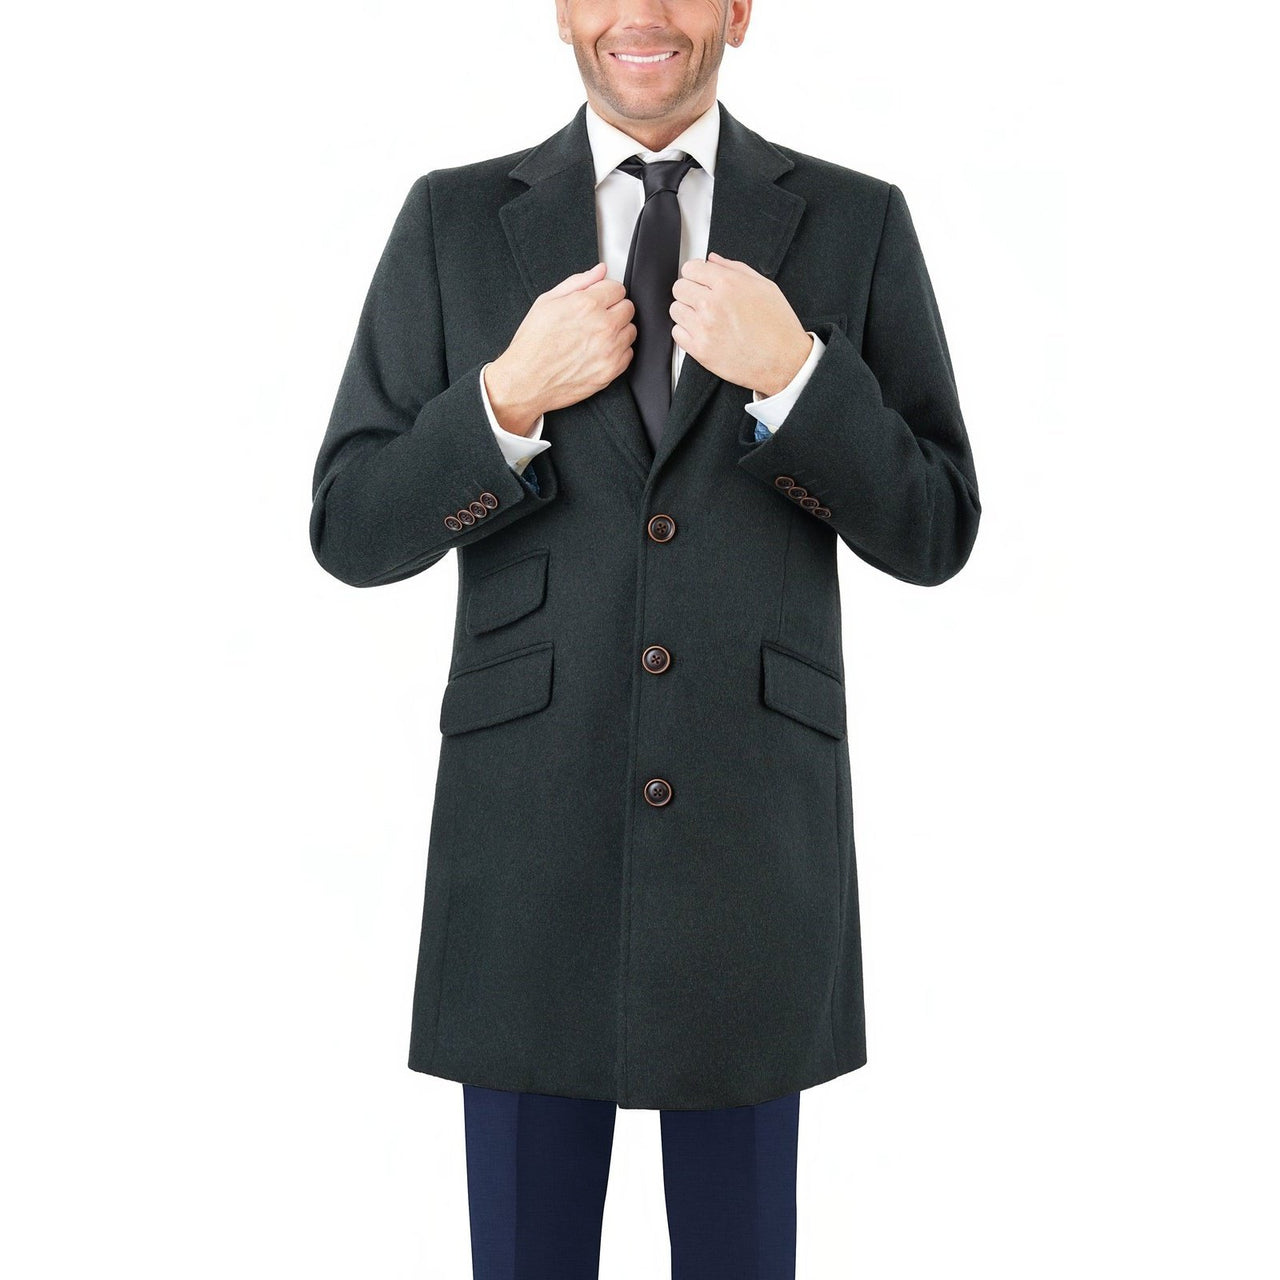 Arthur Black OUTERWEAR The Suit Depot Men's Wool Cashmere Single Breasted Hunter Green 3/4 Length Top Coat